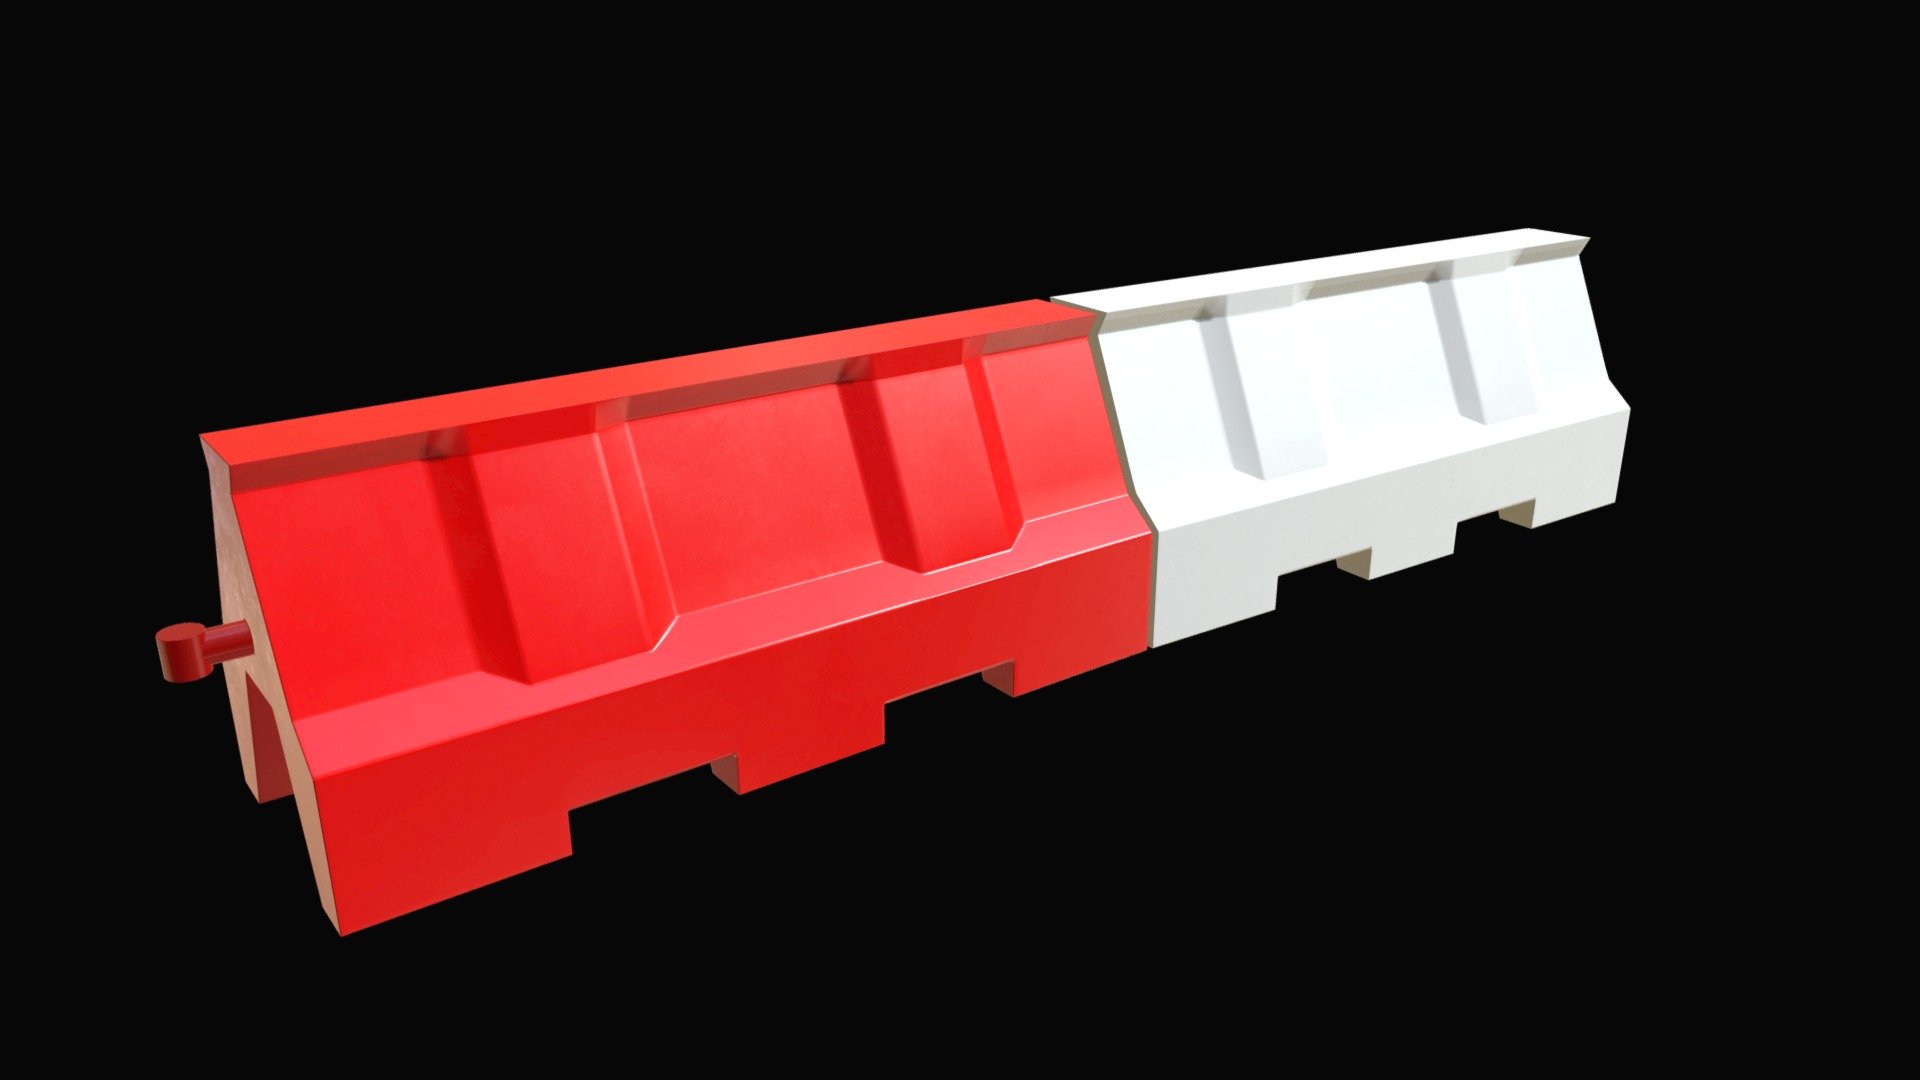 === The following description refers to the additional ZIP package provided with this model ===

Plastic traffic barriers 3D Model. 2 individual objects (red, white), sharing the same non overlapping UV Layout map, Material and PBR Textures set. Production-ready 3D Model, with PBR materials, textures, non overlapping UV Layout map provided in the package.

Quads only geometries (no tris/ngons).

Formats included: FBX, OBJ; scenes: BLEND (with Cycles / Eevee materials); other: png with Alpha.

2 Objects (meshes), 1 PBR Material, UV unwrapped (non overlapping UV Layout map provided in the package); UV-mapped Textures.

UV Layout maps and Image Textures resolutions: 2048x2048; PBR Textures made with Substance Painter.

Polygonal, QUADS ONLY (no tris/ngons); 12924 vertices, 12916 quad faces (25832 tris).

Real world dimensions; scene scale units: cm in Blender (that is: Metric with 0.01 scale).

Uniform scale object (scale applied in Blender) 3d model